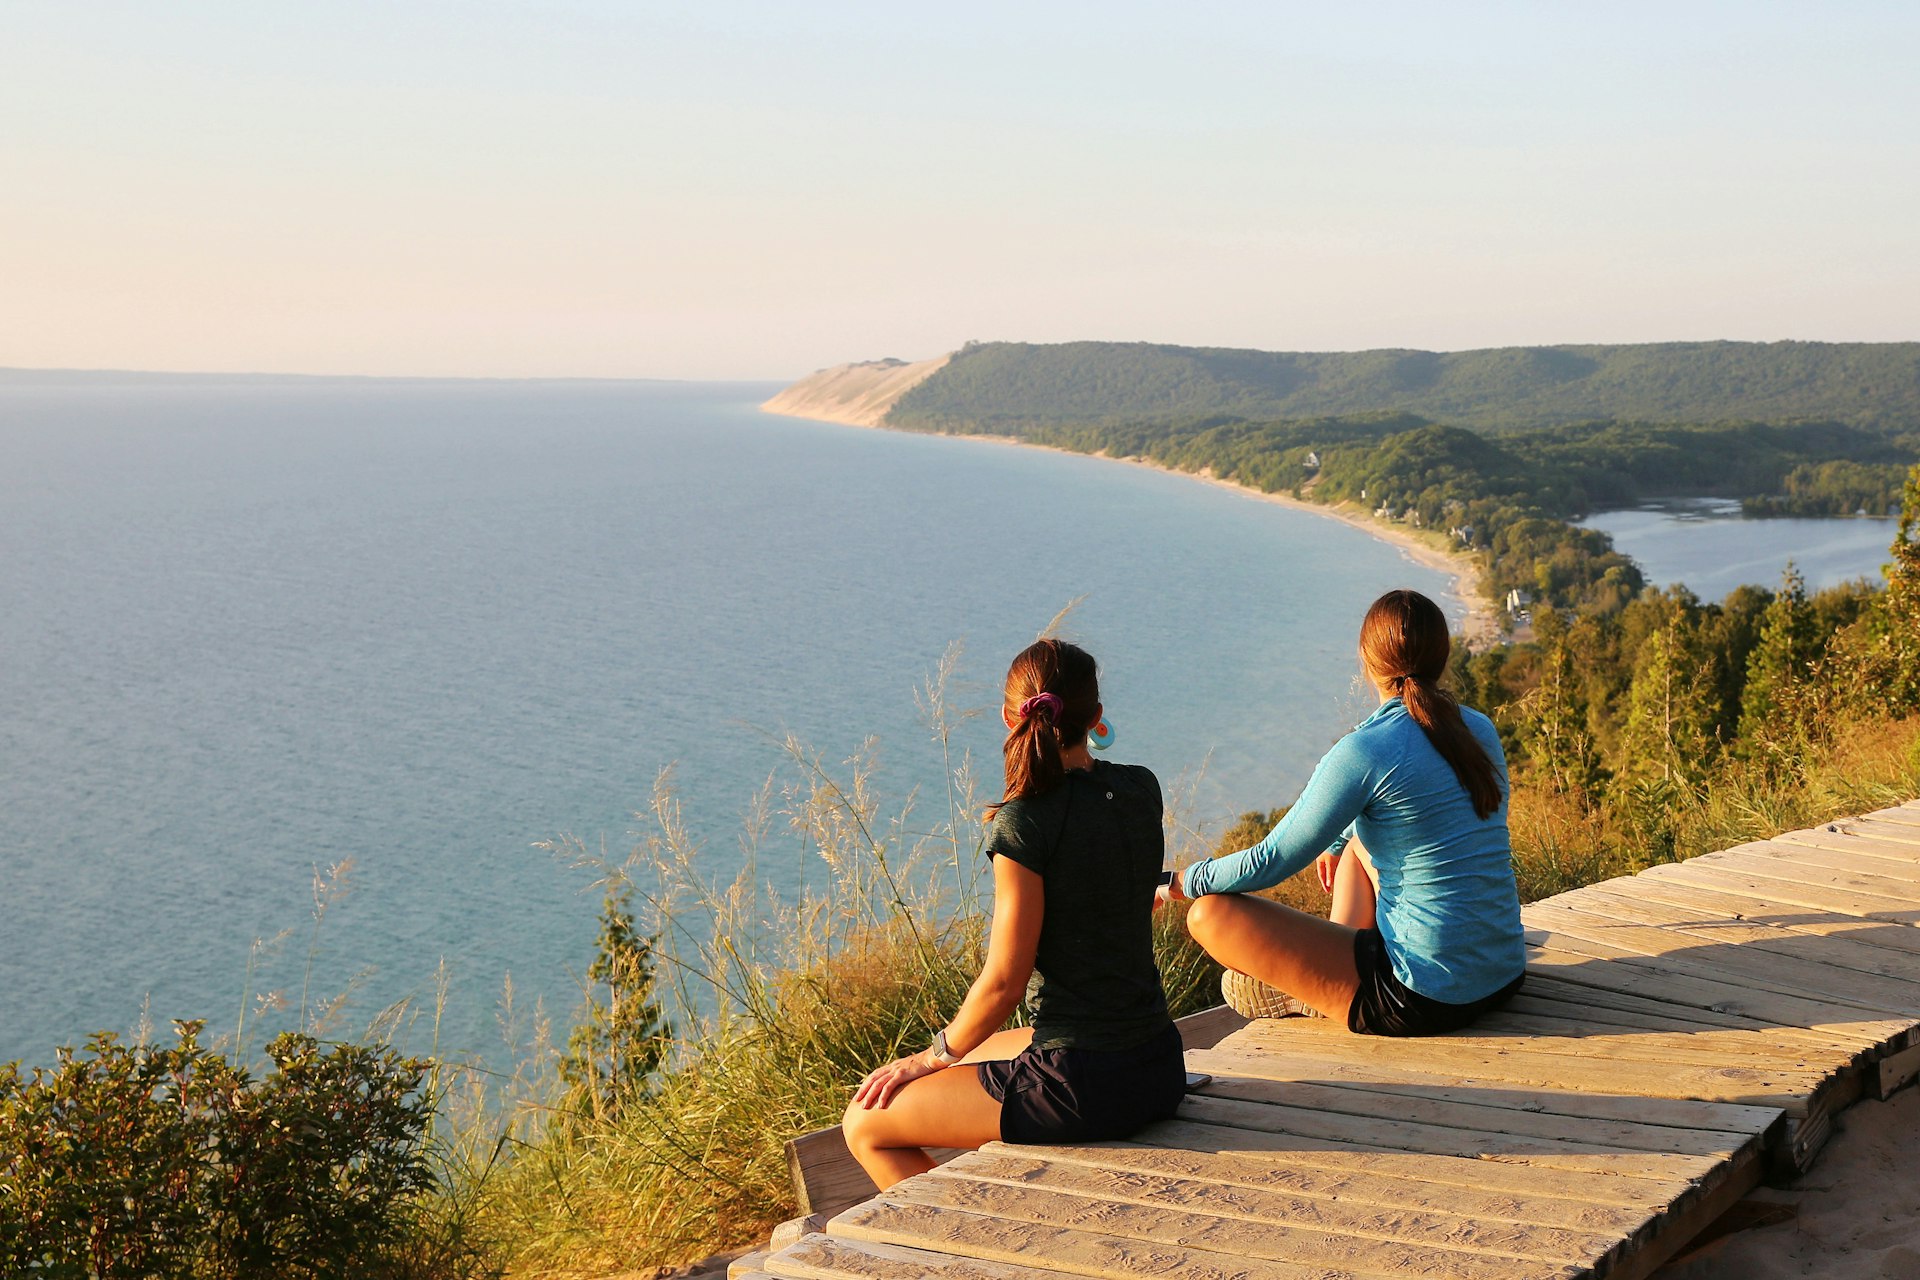 Tourists enjoying beautiful sunset scenery at the Empire Bluff Scenic Lookout, overlooking Lake Michigan, the Sleeping Bear Dunes, and the Manitou Island.